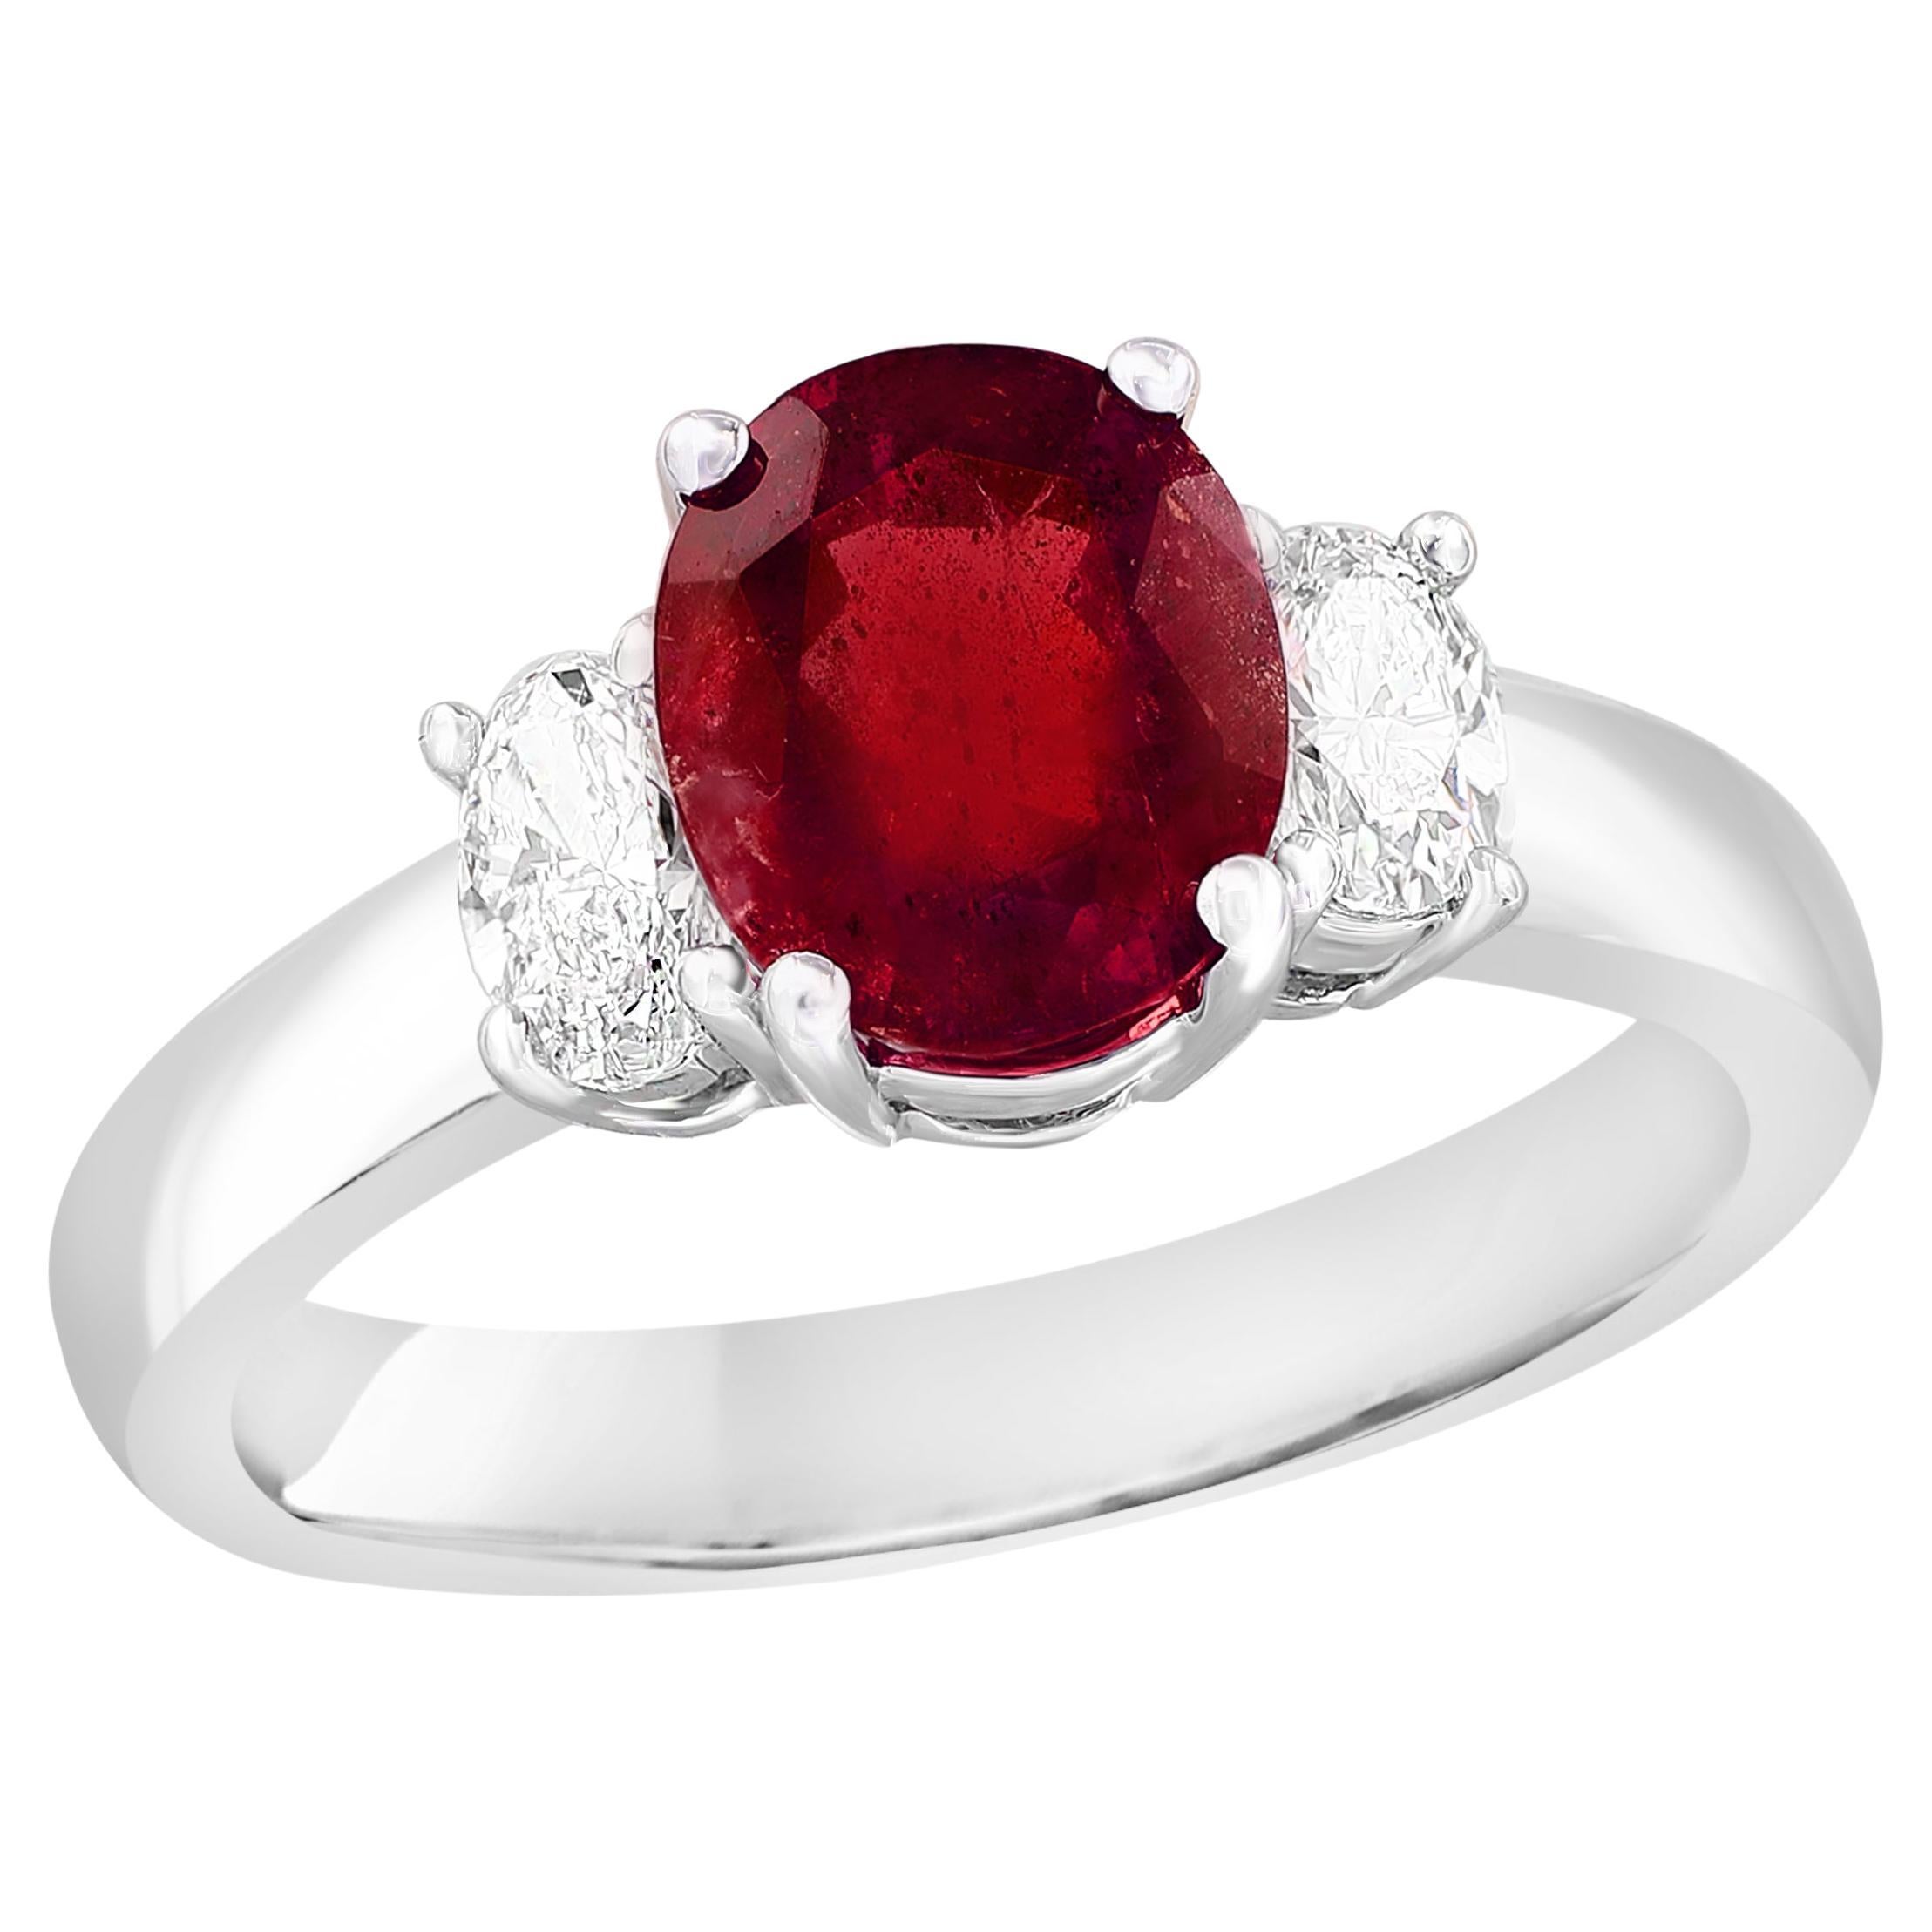 1.15 Carat Oval Cut Ruby & Diamond 3 Stone Engagement Ring in 18k White Gold For Sale